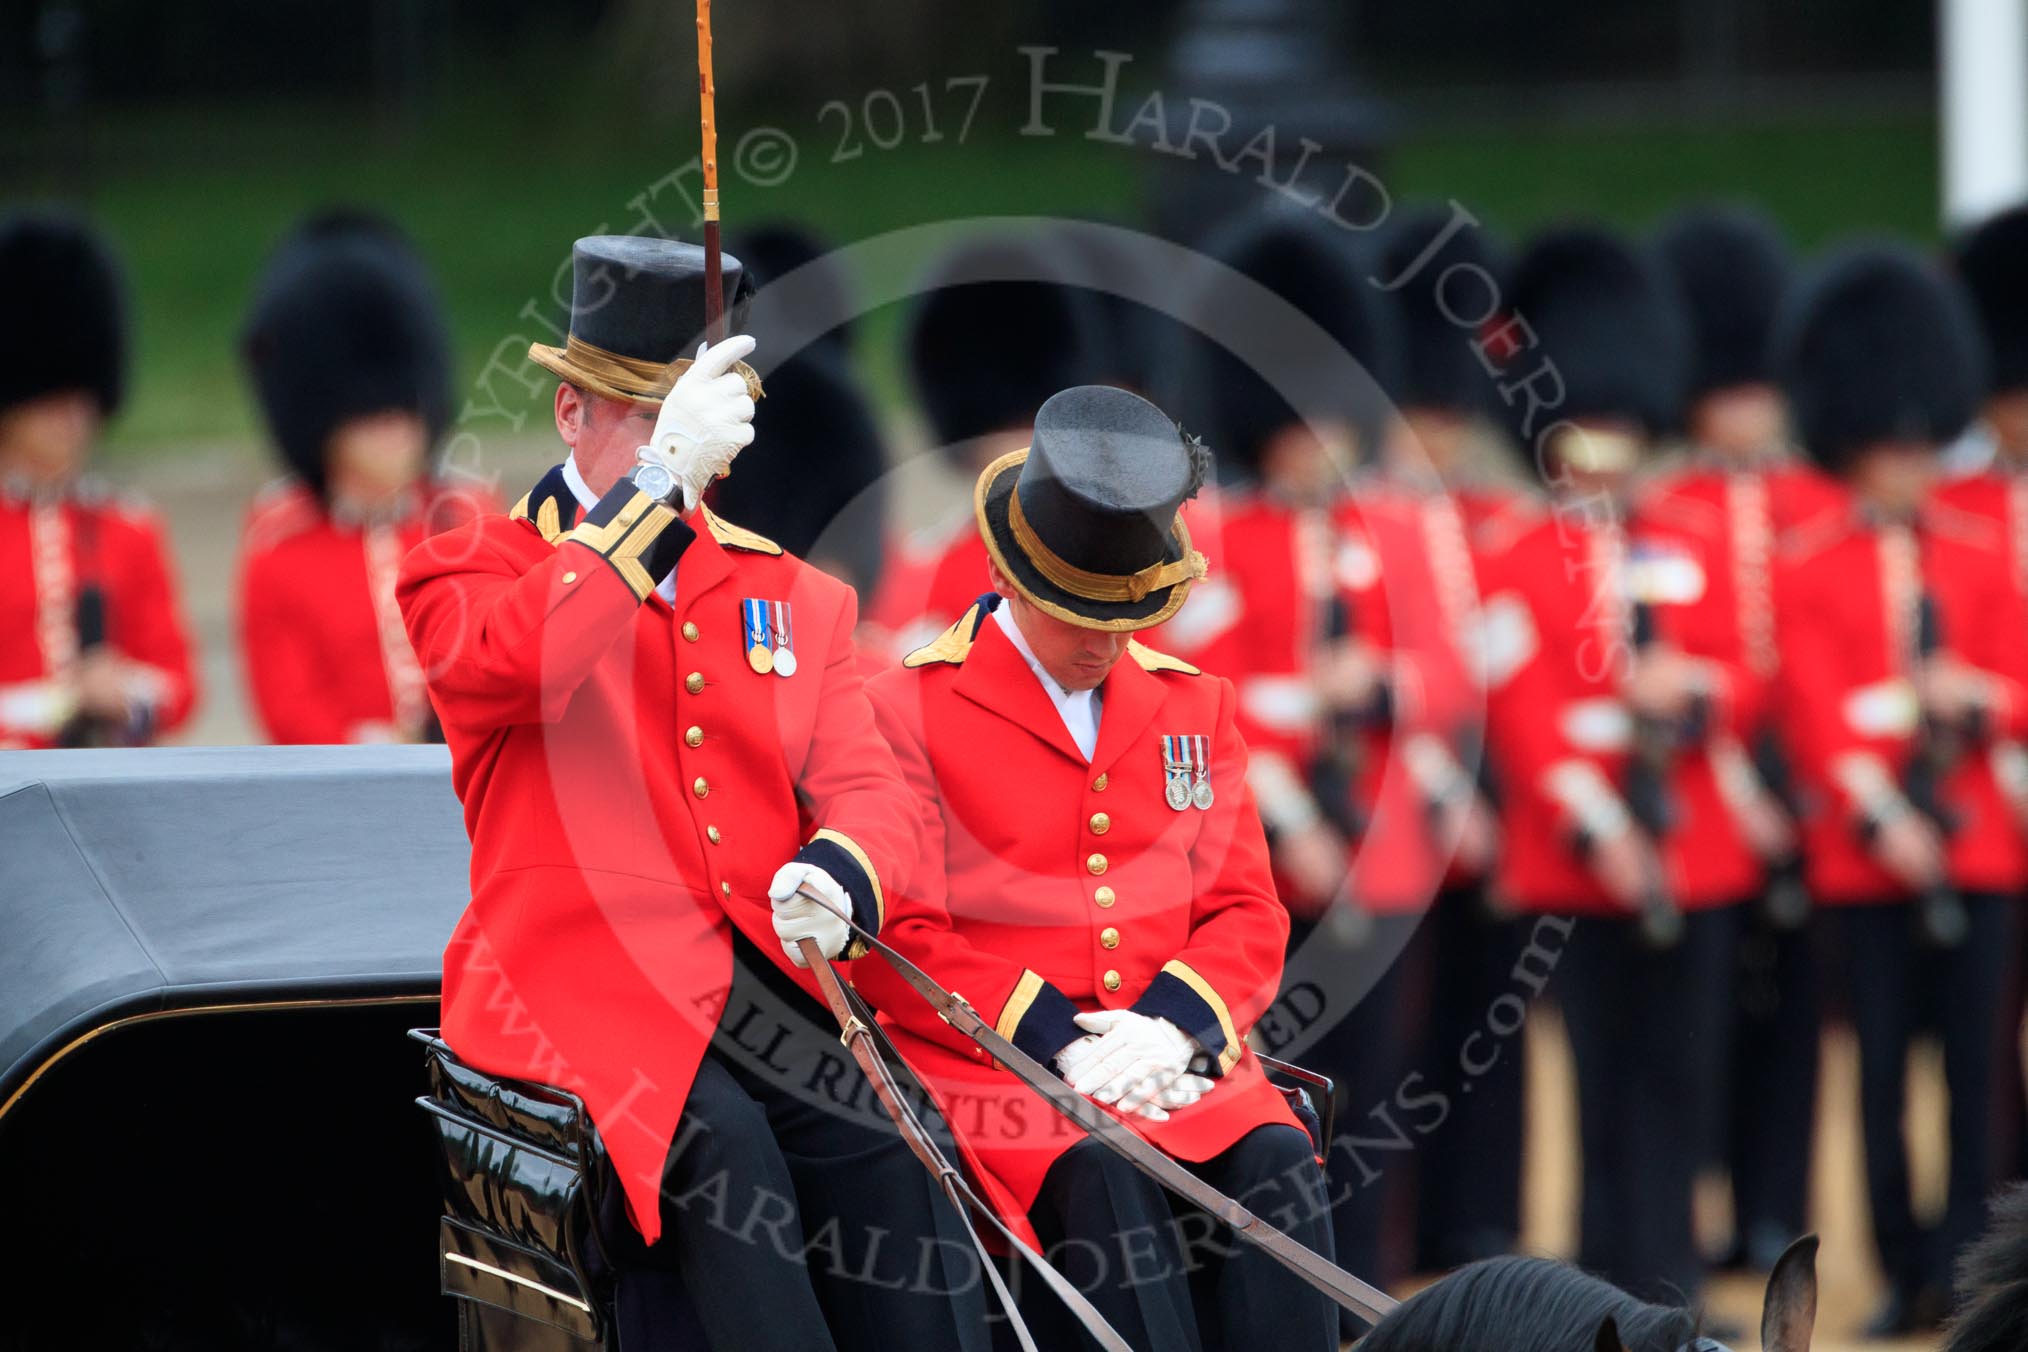 during The Colonel's Review {iptcyear4} (final rehearsal for Trooping the Colour, The Queen's Birthday Parade)  at Horse Guards Parade, Westminster, London, 2 June 2018, 10:50.